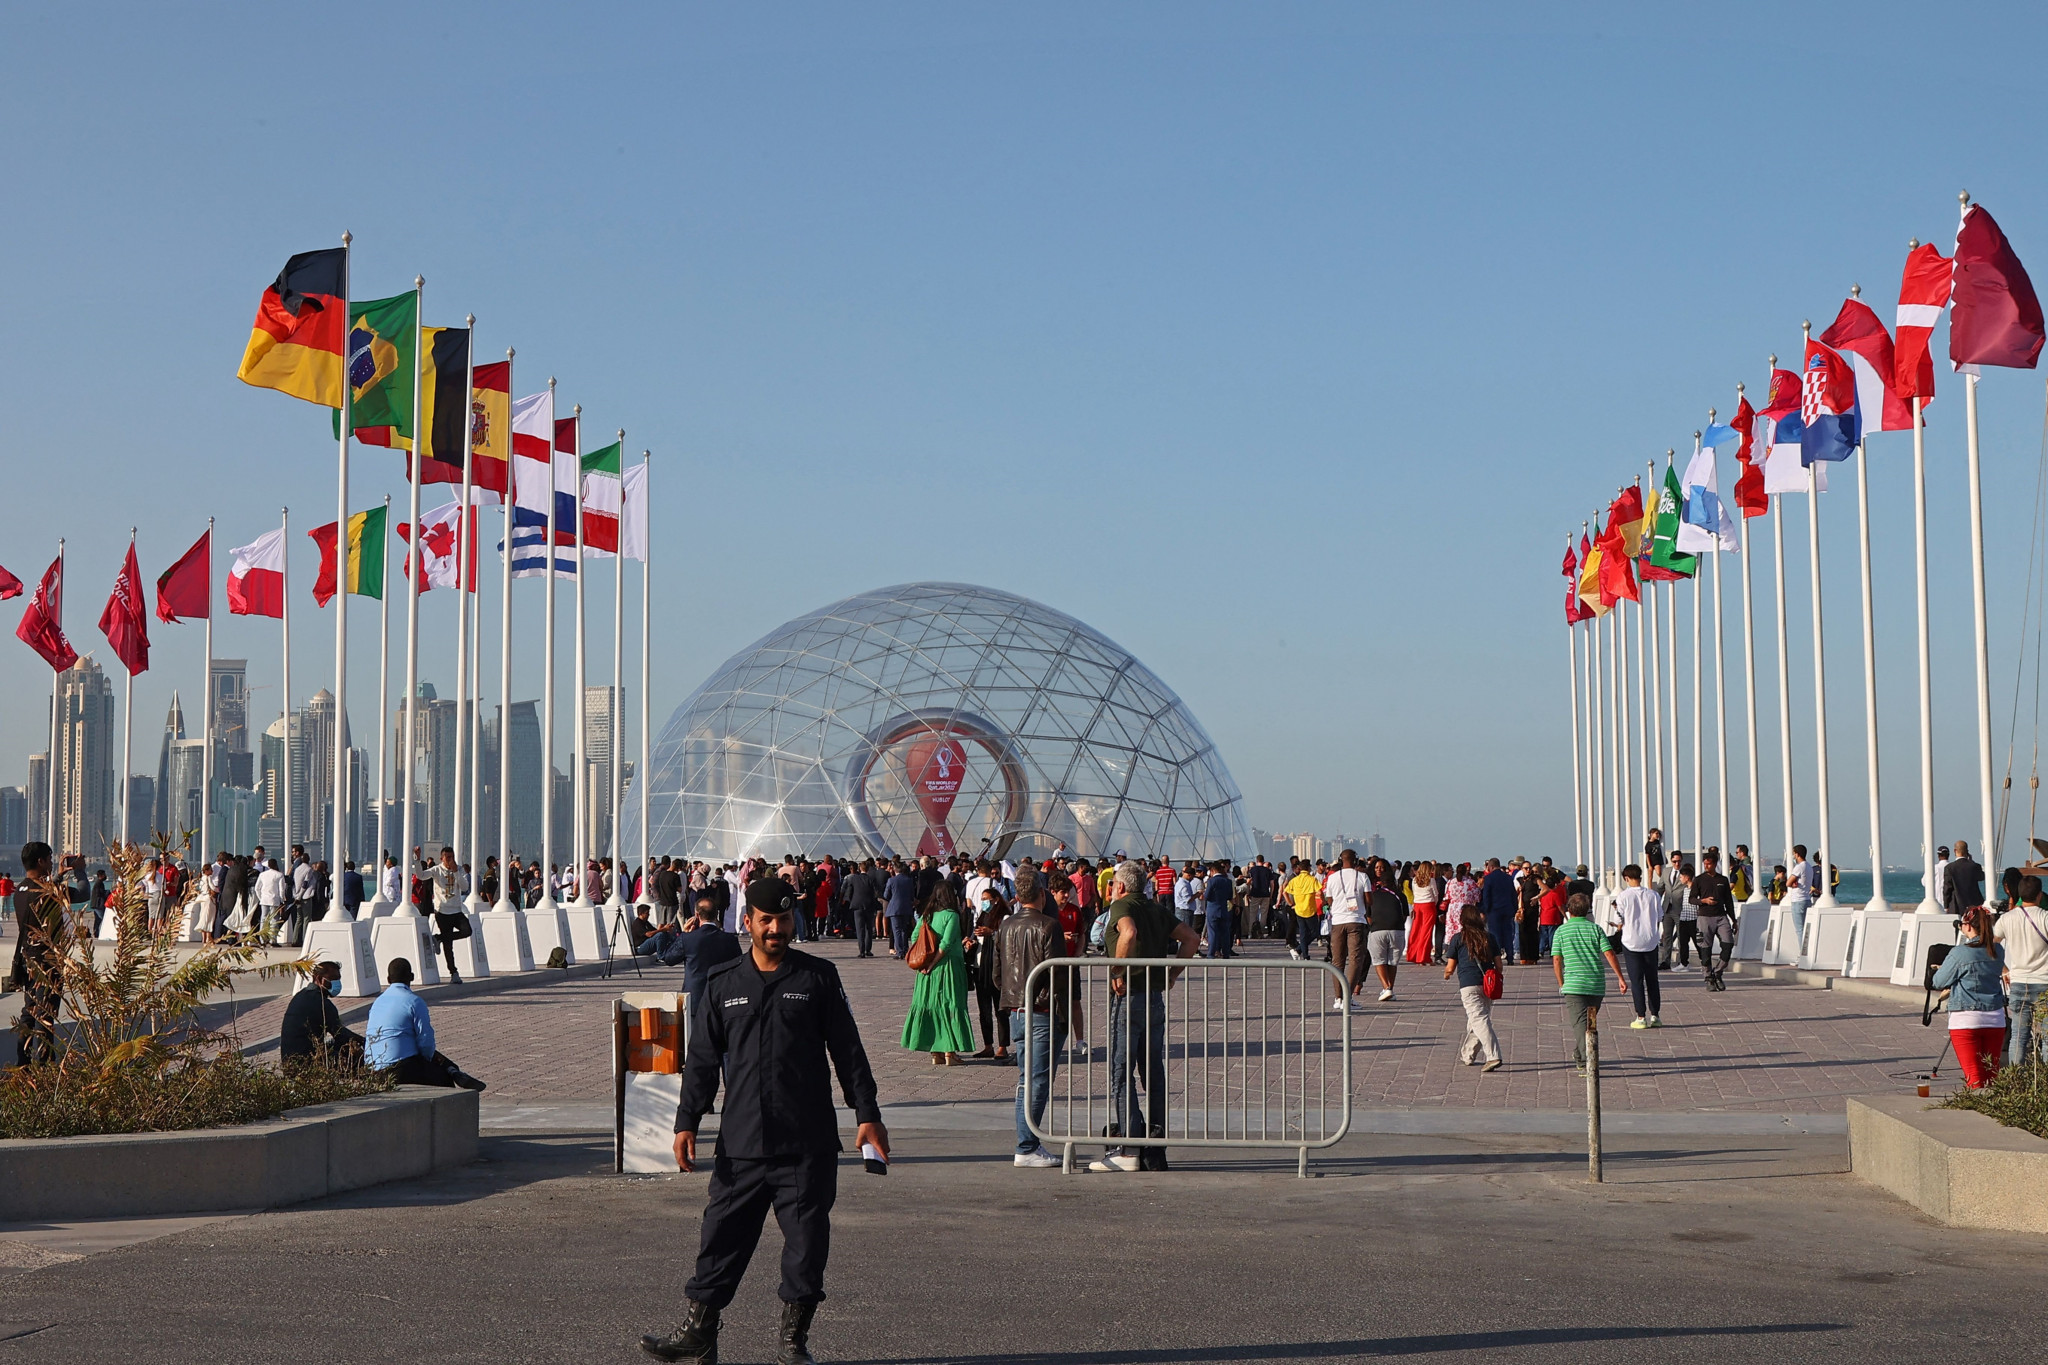 Security workers linked to Qatar 2022 subject to "forced labour", Amnesty claims